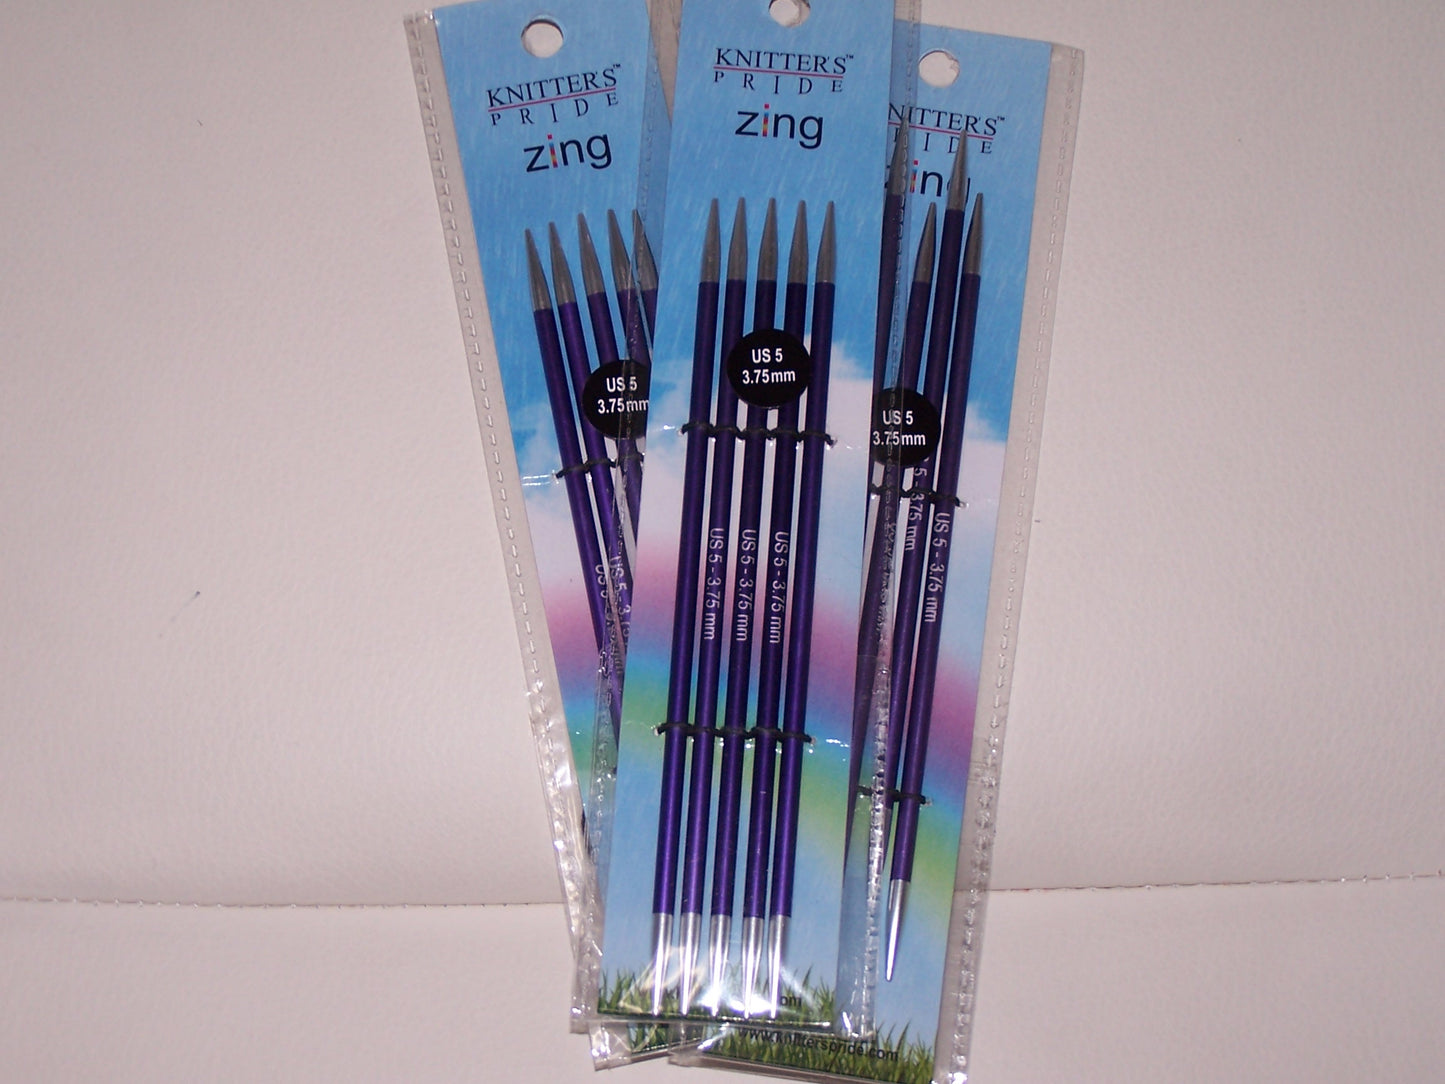 Knitters Pride Zing US 5 (3.75mm) size 6 inch DPN's